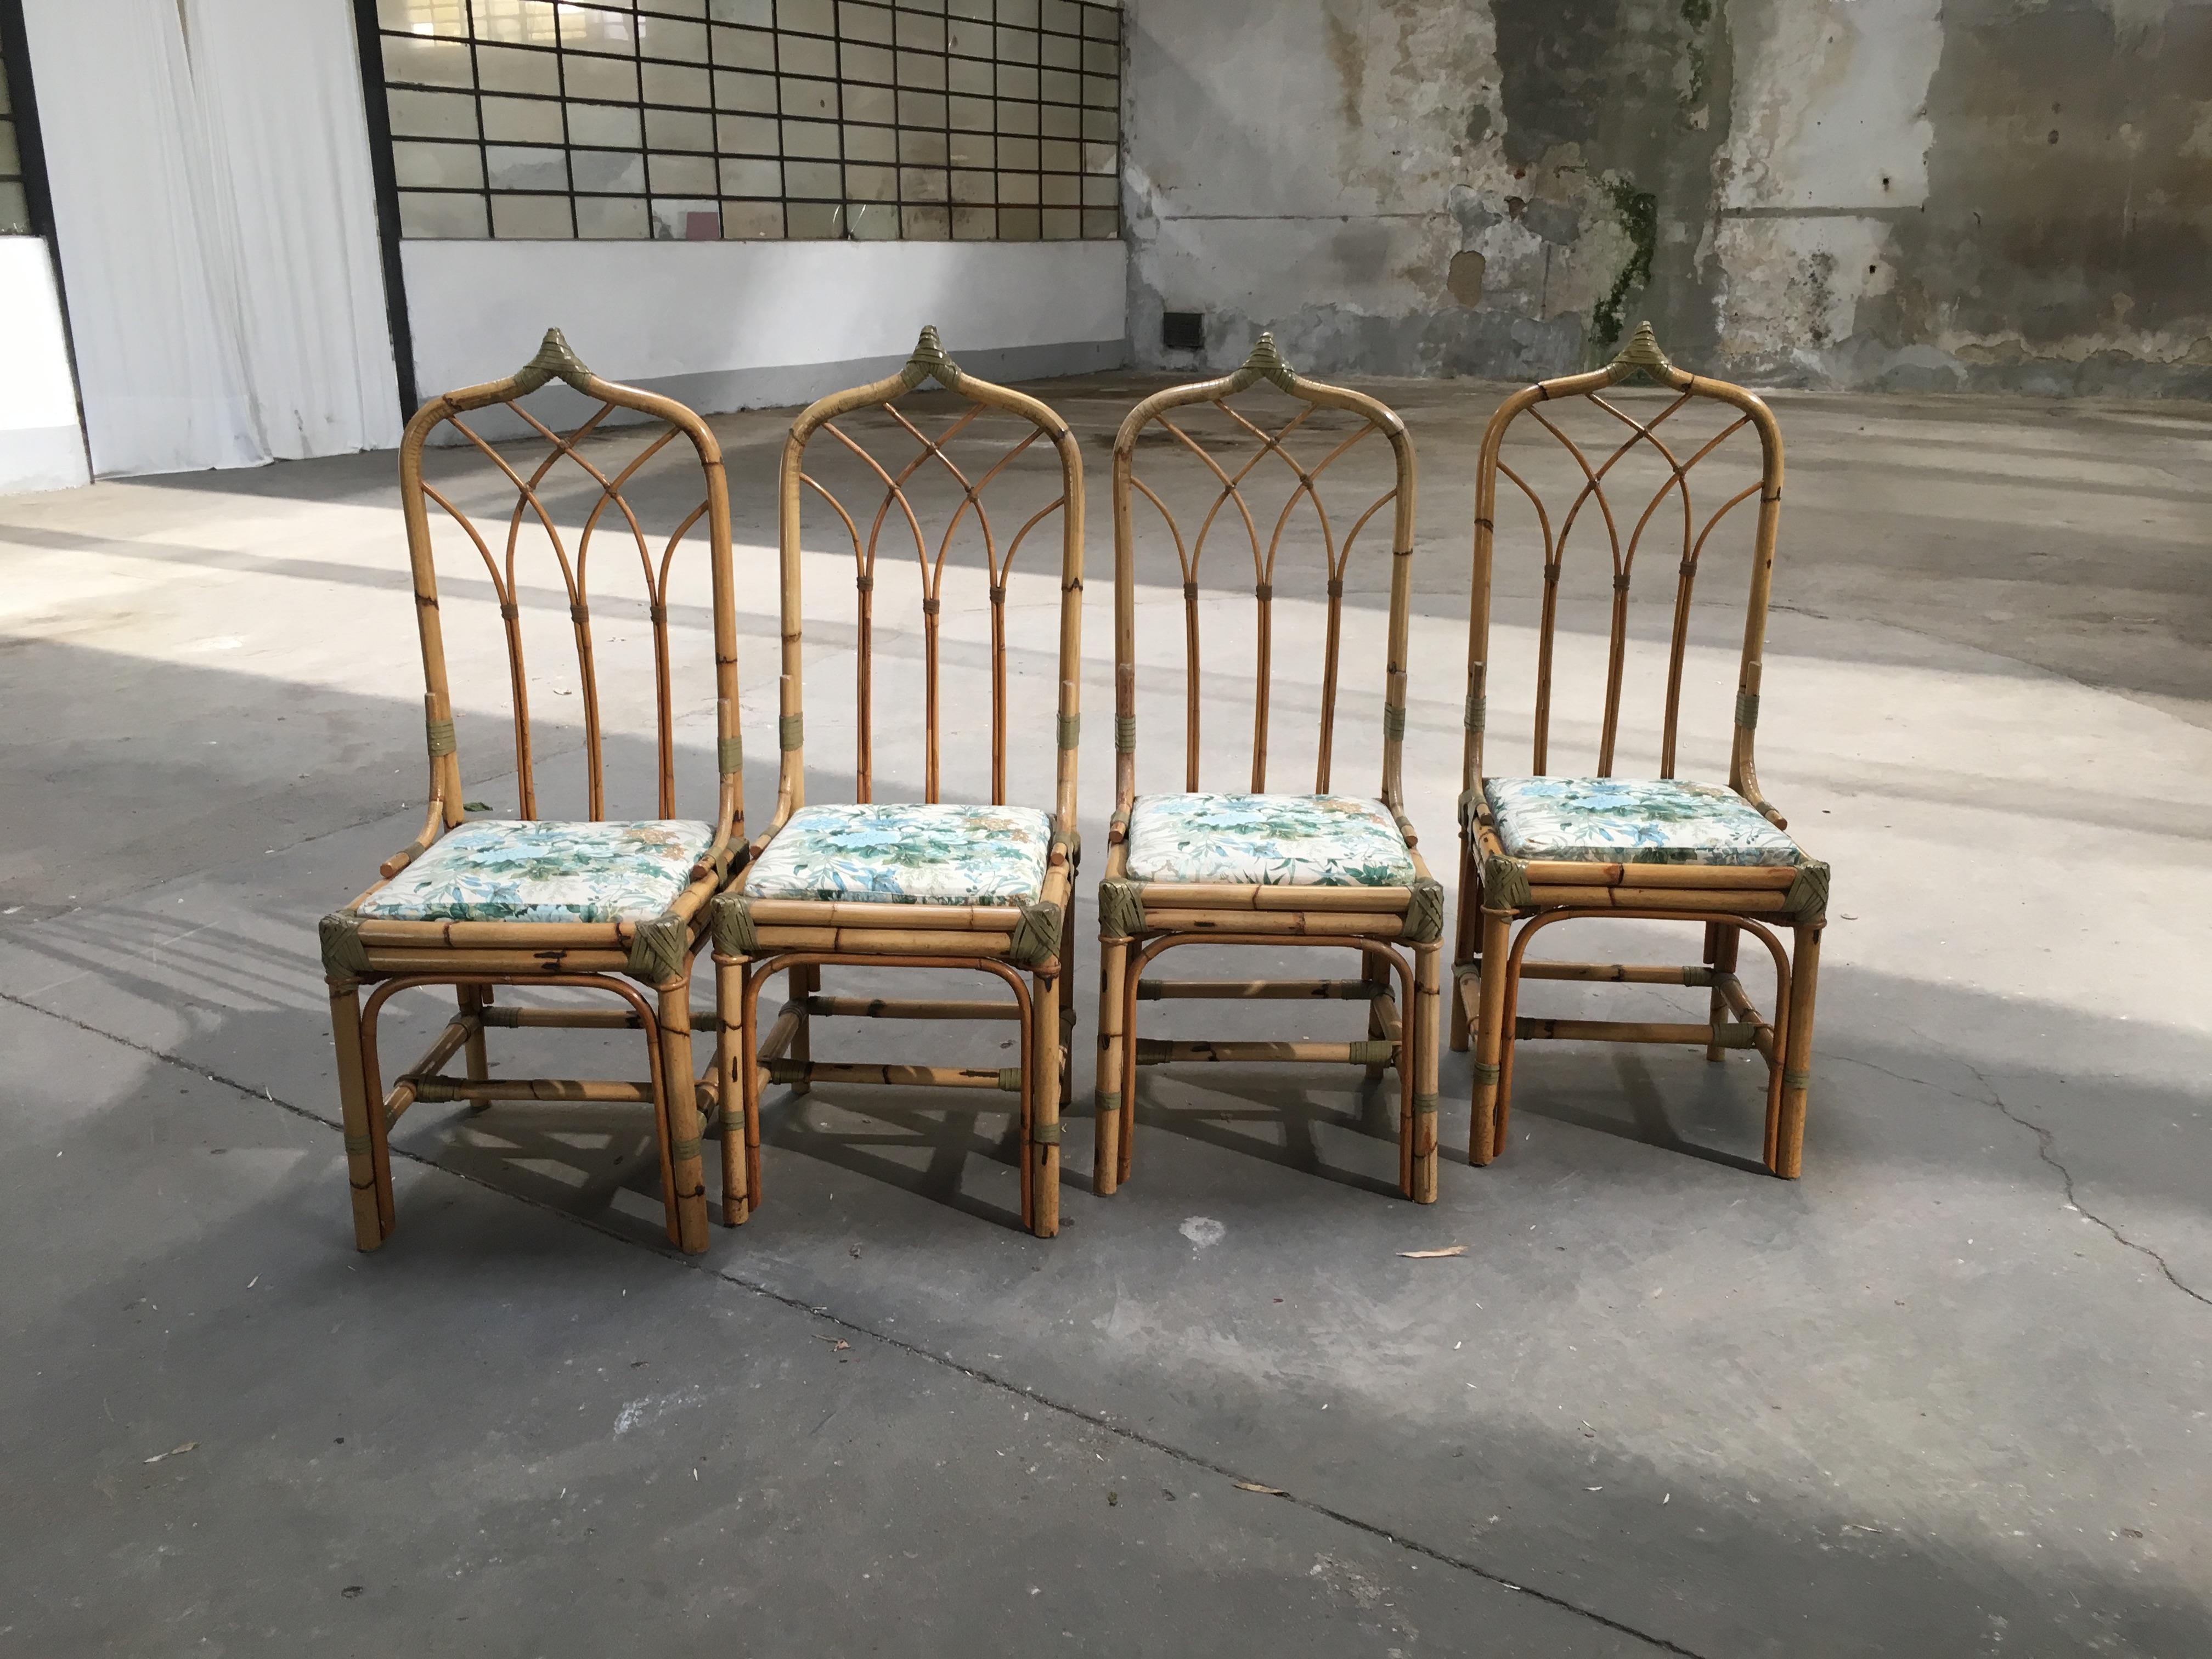 Mid-Century Modern set of 4 bamboo Italian chairs with original floral cushions
 All the binding of the chairs are made with leather laces. 
If needed, the chairs could be sold together with their dining table as shown in the pictures.
Quotation